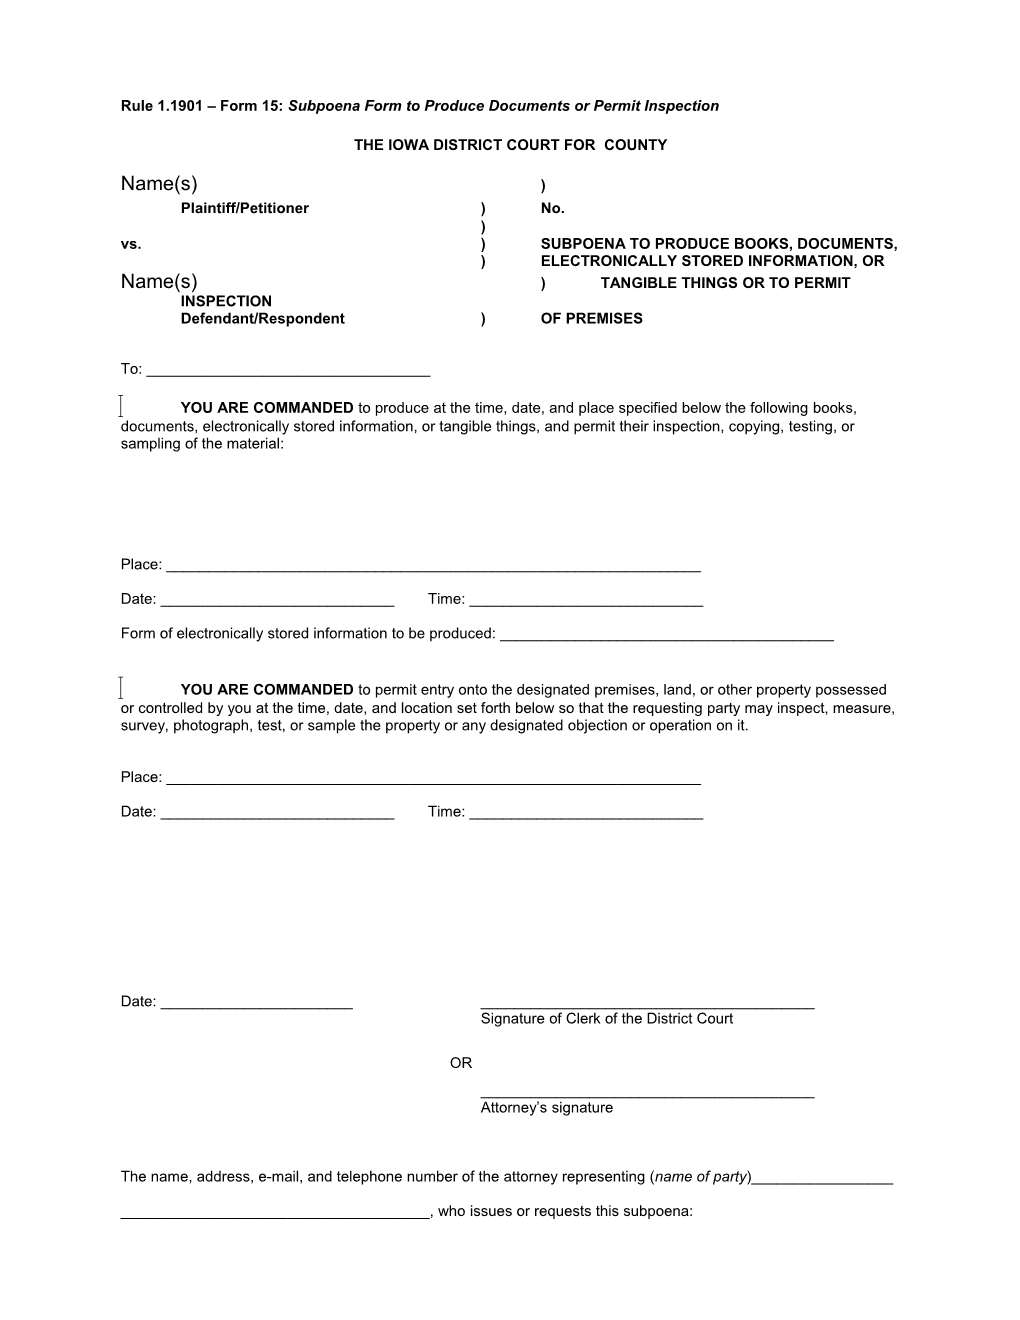 Rule 1.1901 Form 15: Subpoena Form to Produce Documents Or Permit Inspection